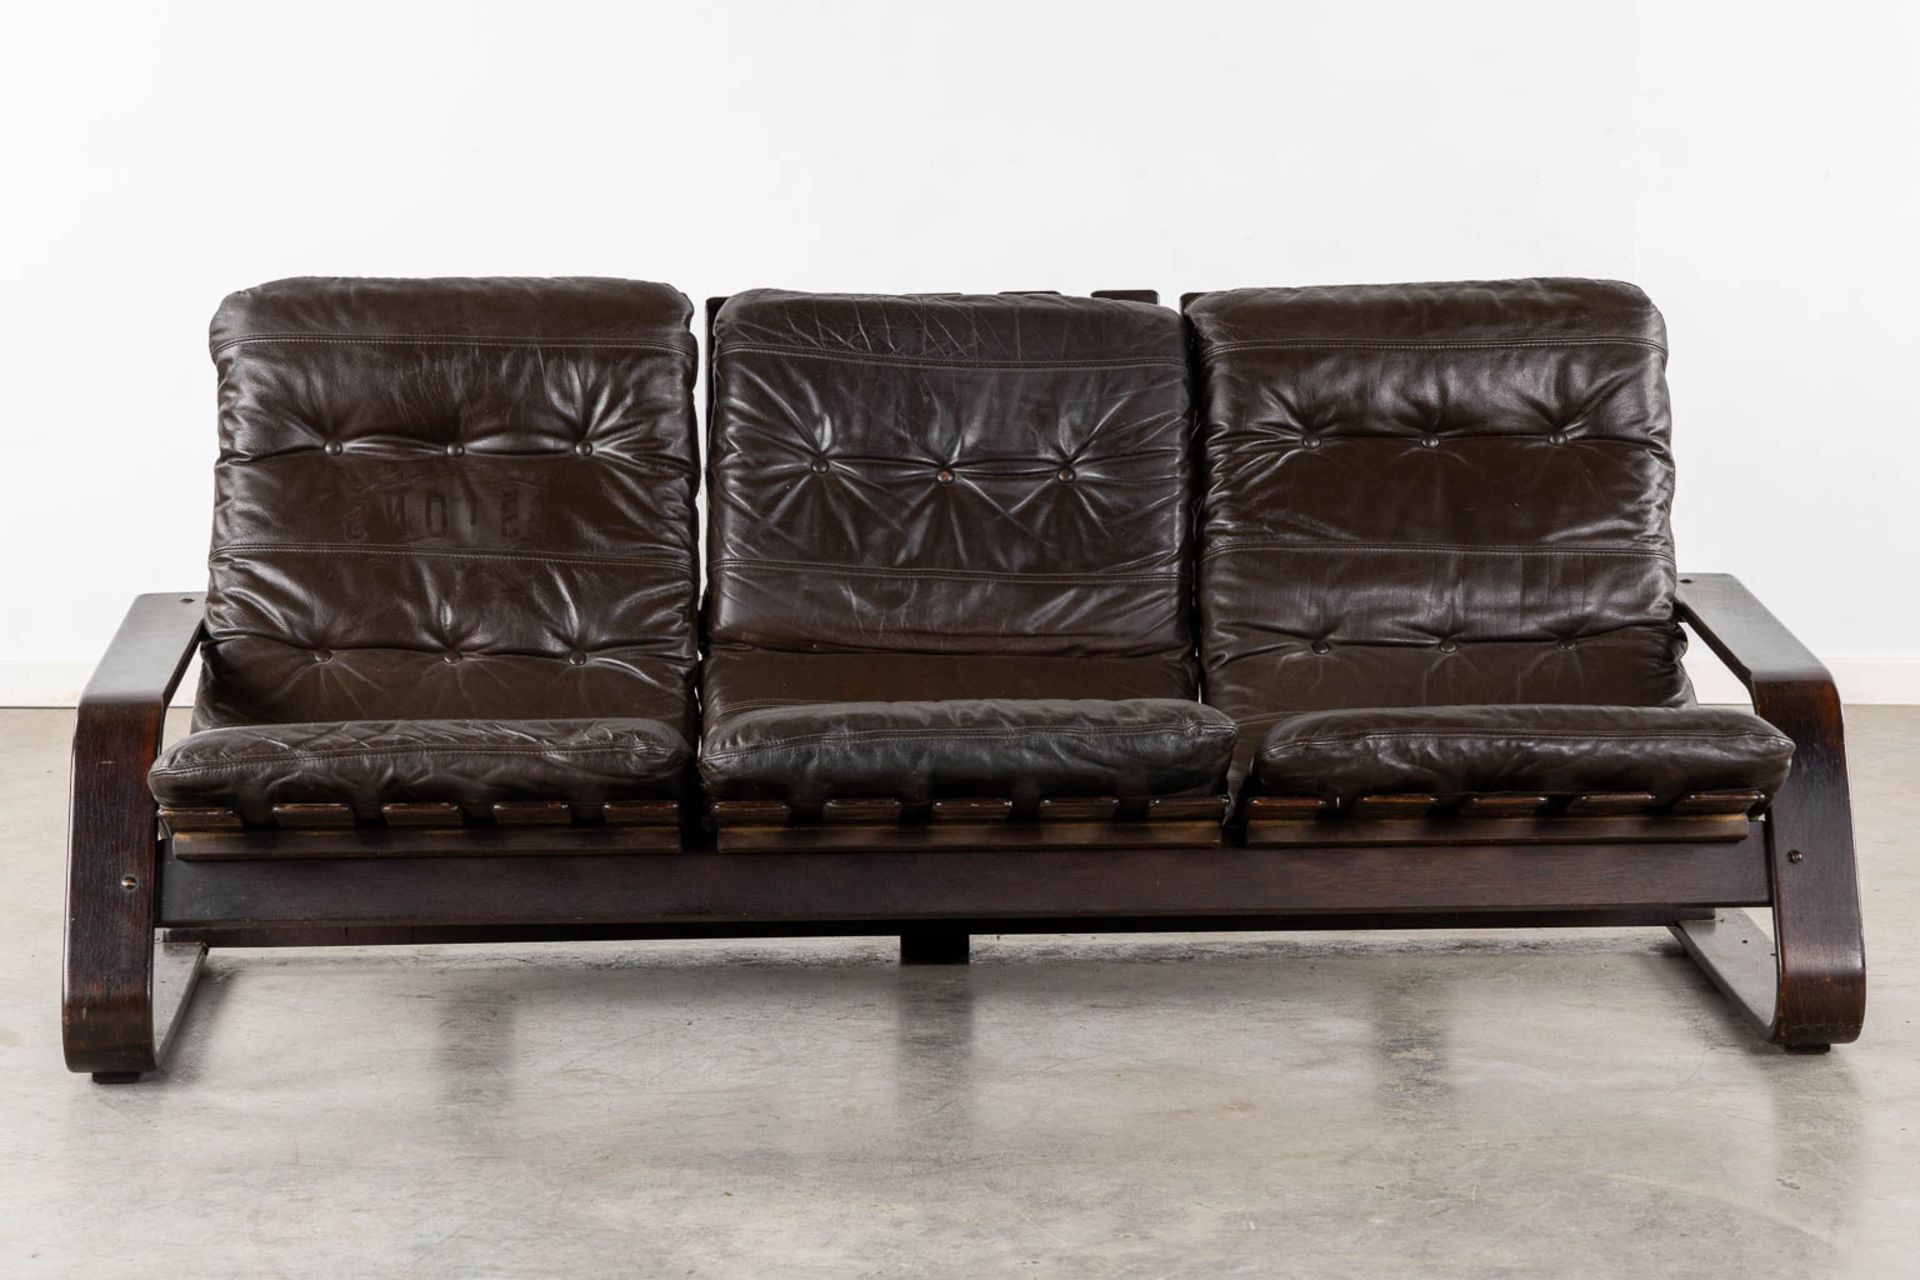 A three-person sofa, wood and leather. In the style of Westnova. (L:85 x W:192 x H:85 cm) - Bild 3 aus 9